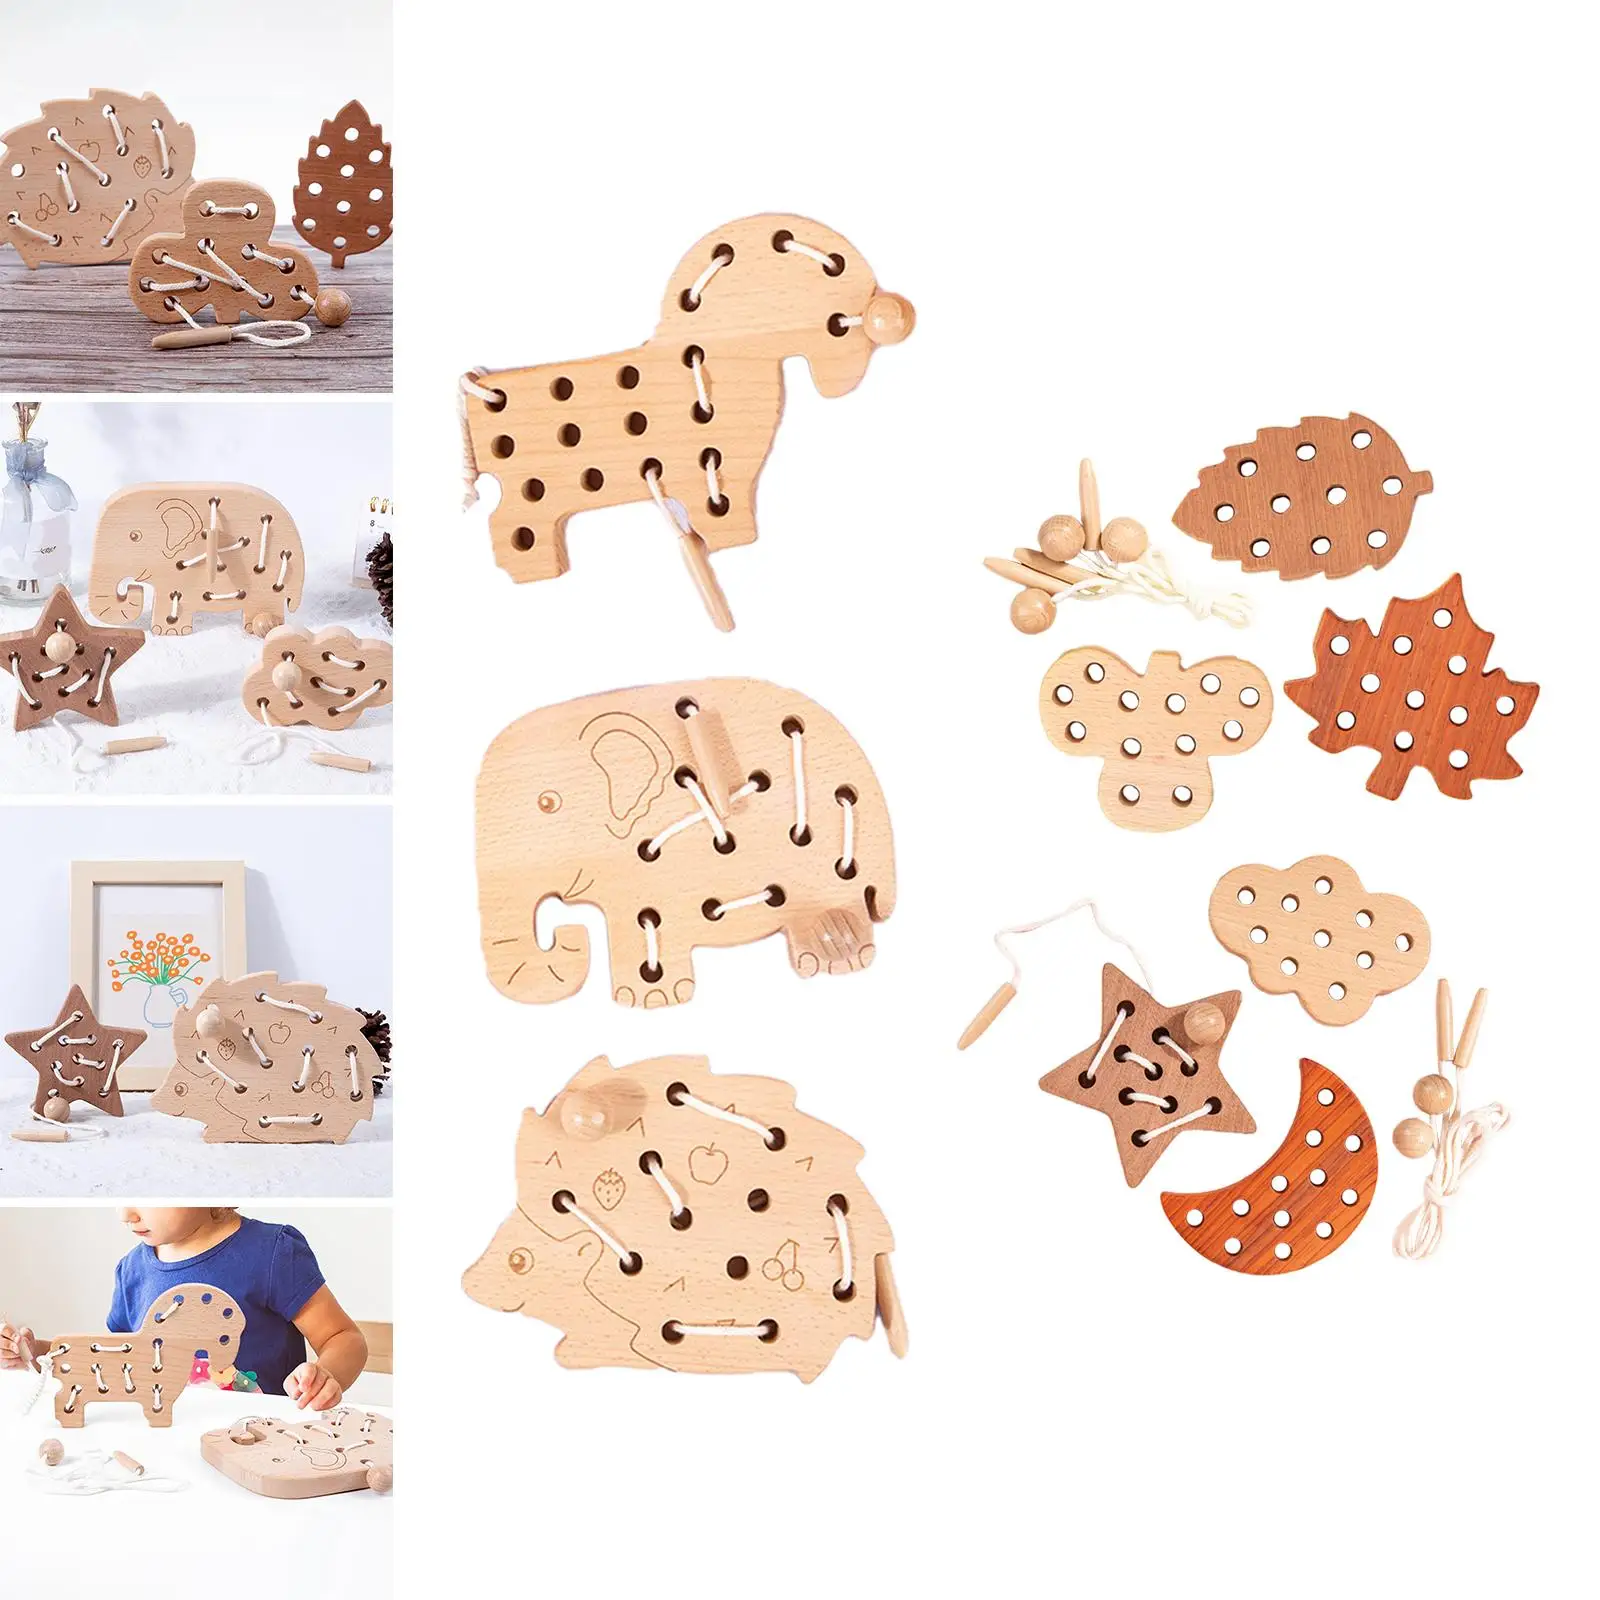 3x Wooden Lacing Threading Toys Montessori Toys Educational Kindergarten Wood Lace Block Puzzle for Kids Toddlers Birthday Gift